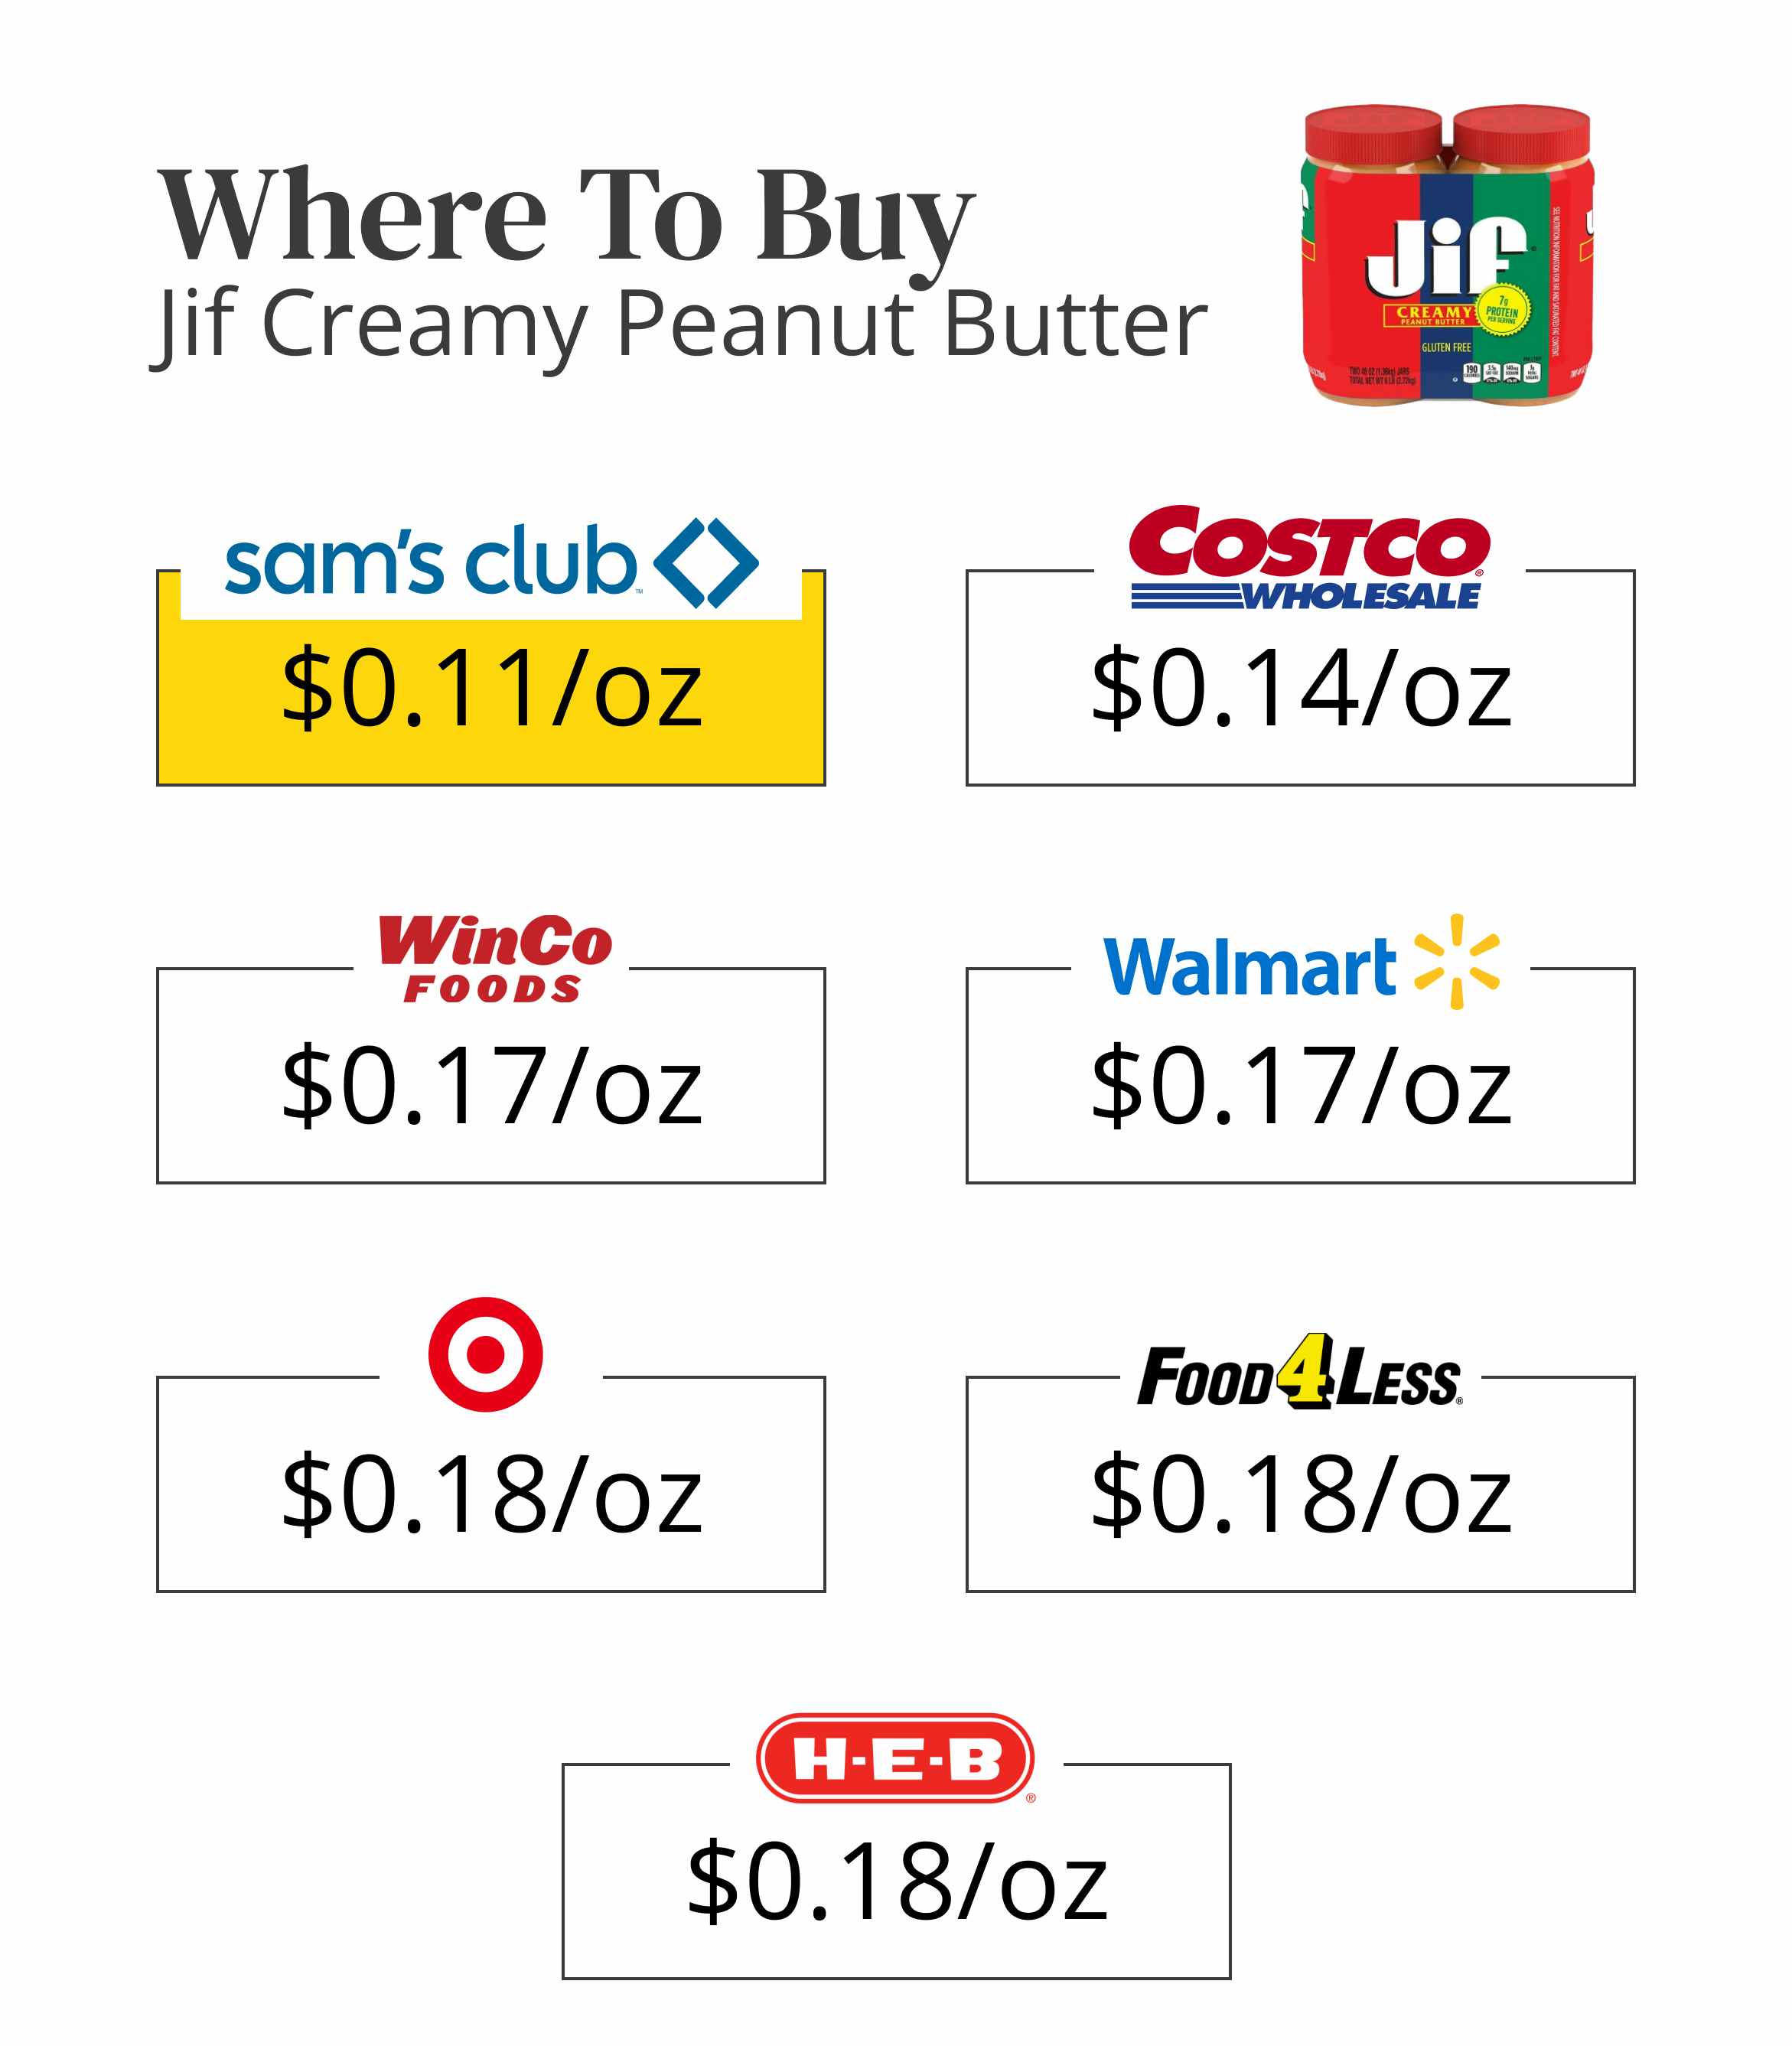 Where to buy Jif creamy peanut butter for the cheapest price.